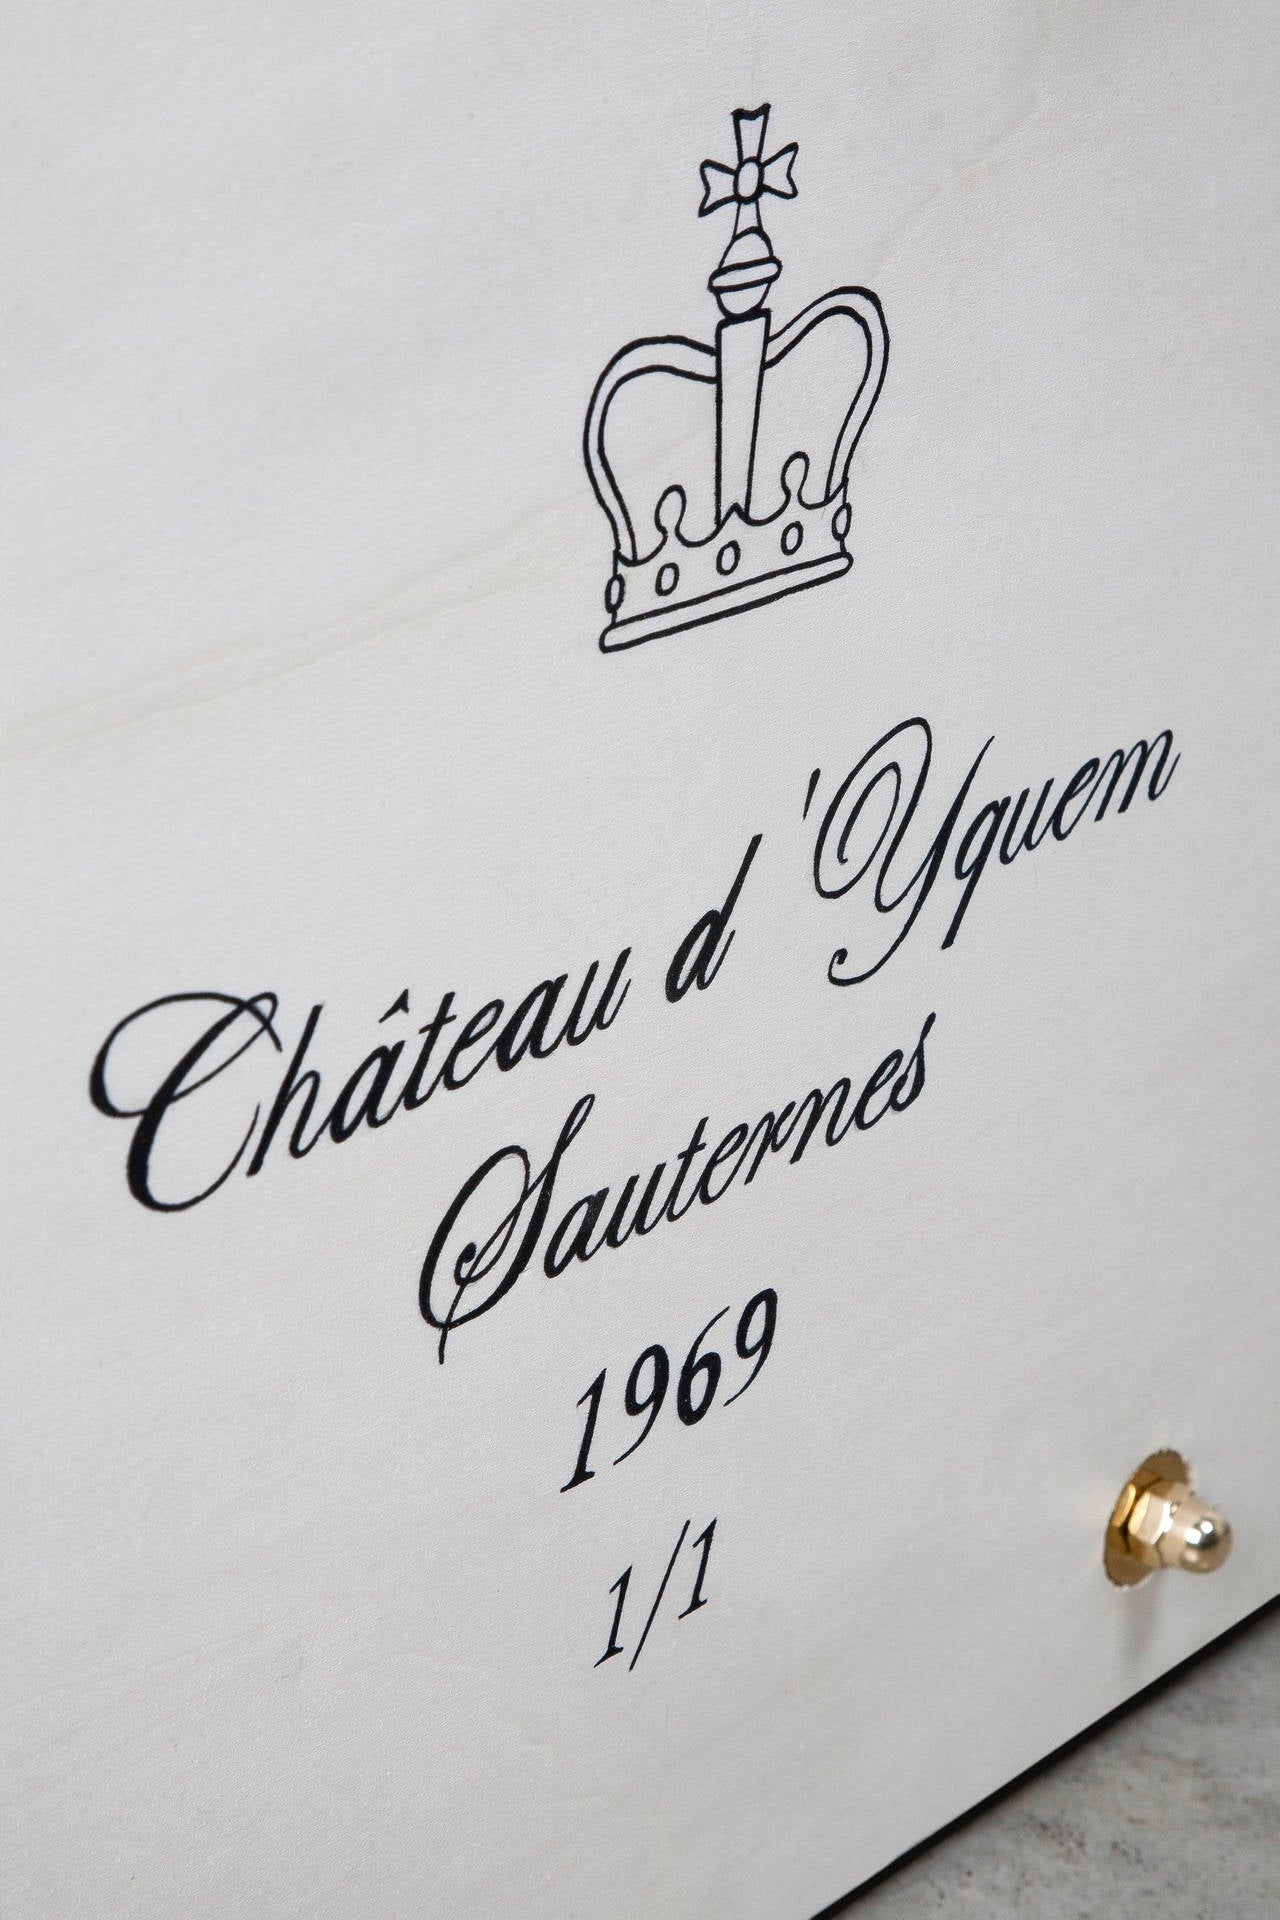 French Château d'Yquem and Studio Job No. 18 